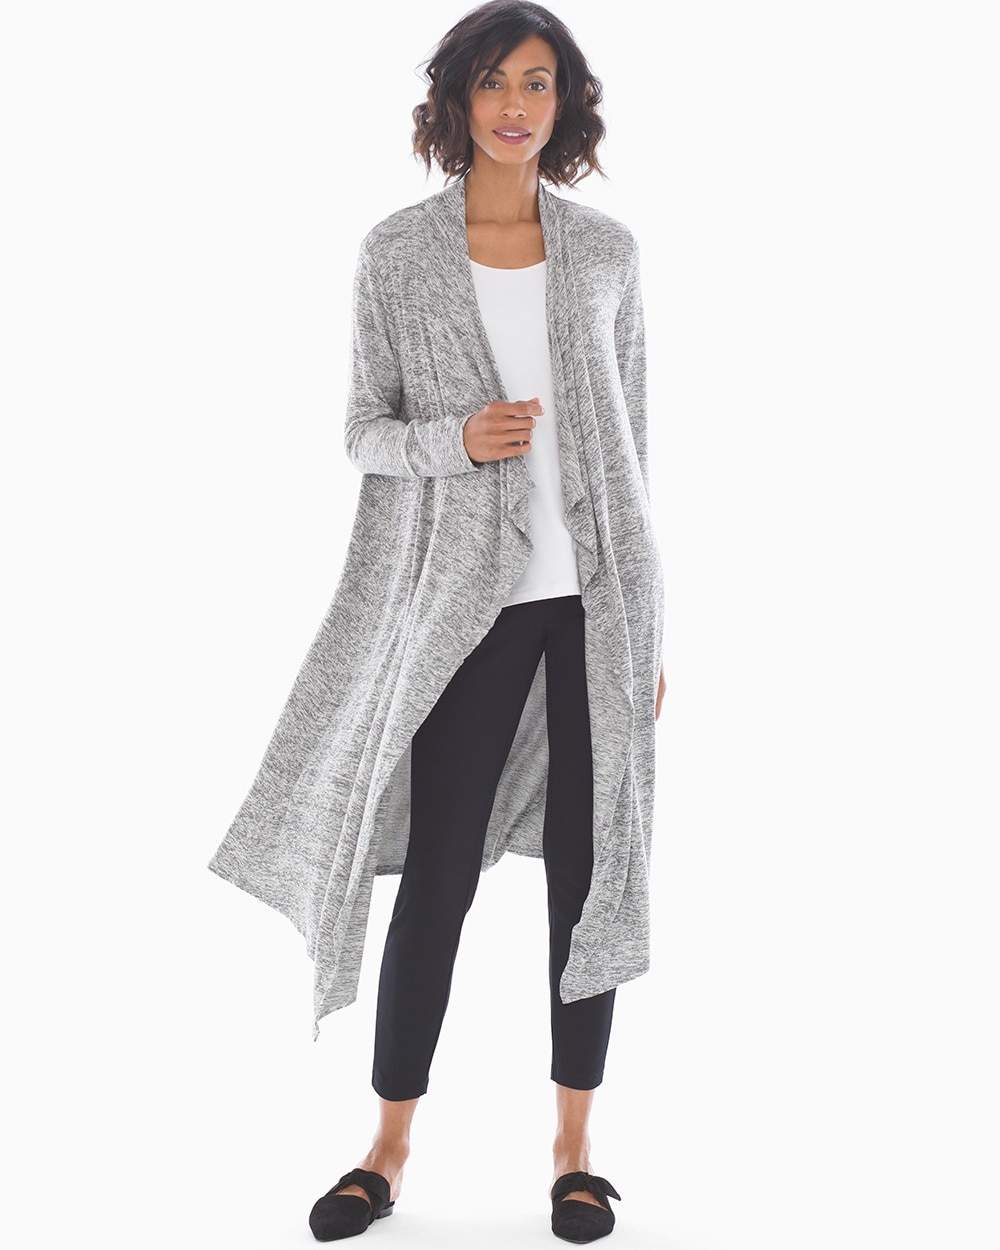 Brushed Knit Duster Light Gray Marl